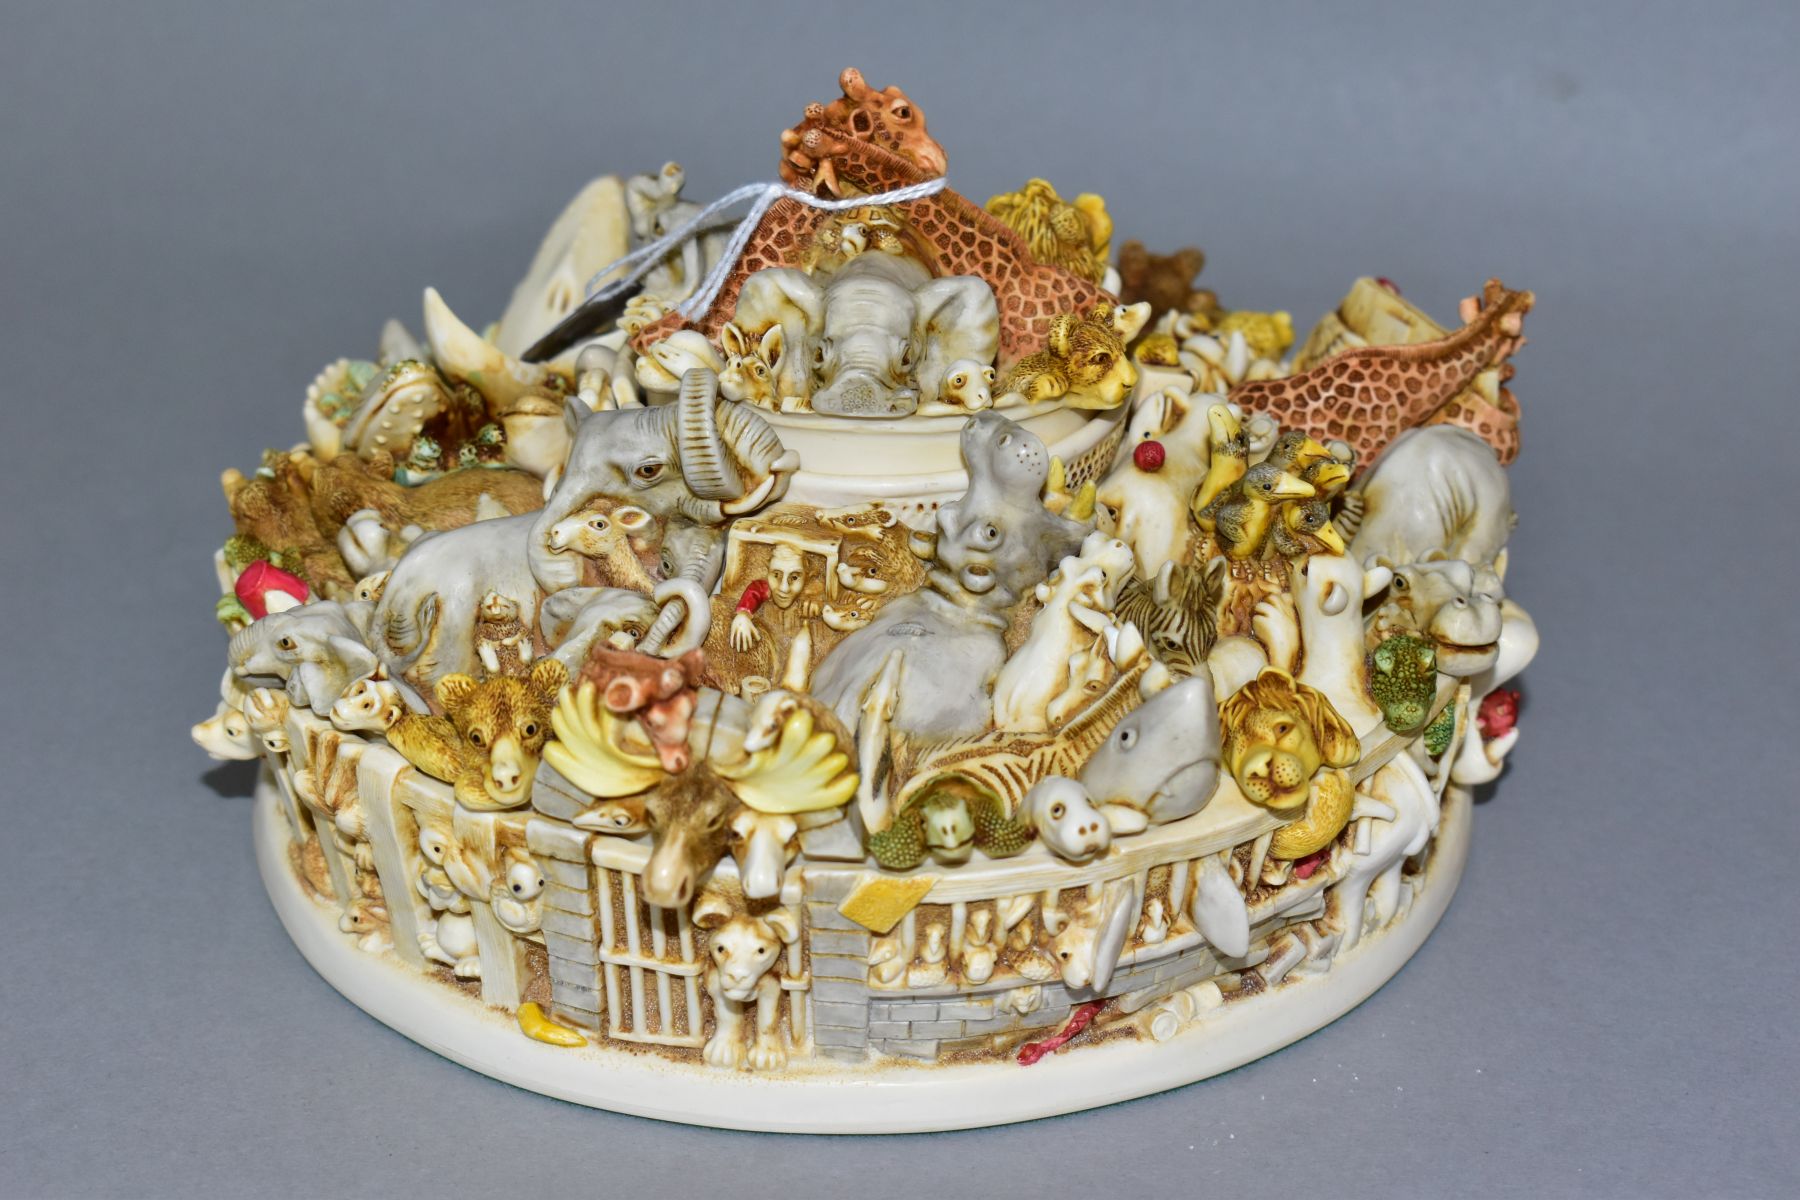 A BOXED LIMITED EDITION HARMONY KINGDOM SIN CITY, no 2326/5000, depicting various animals in zoo - Image 5 of 11